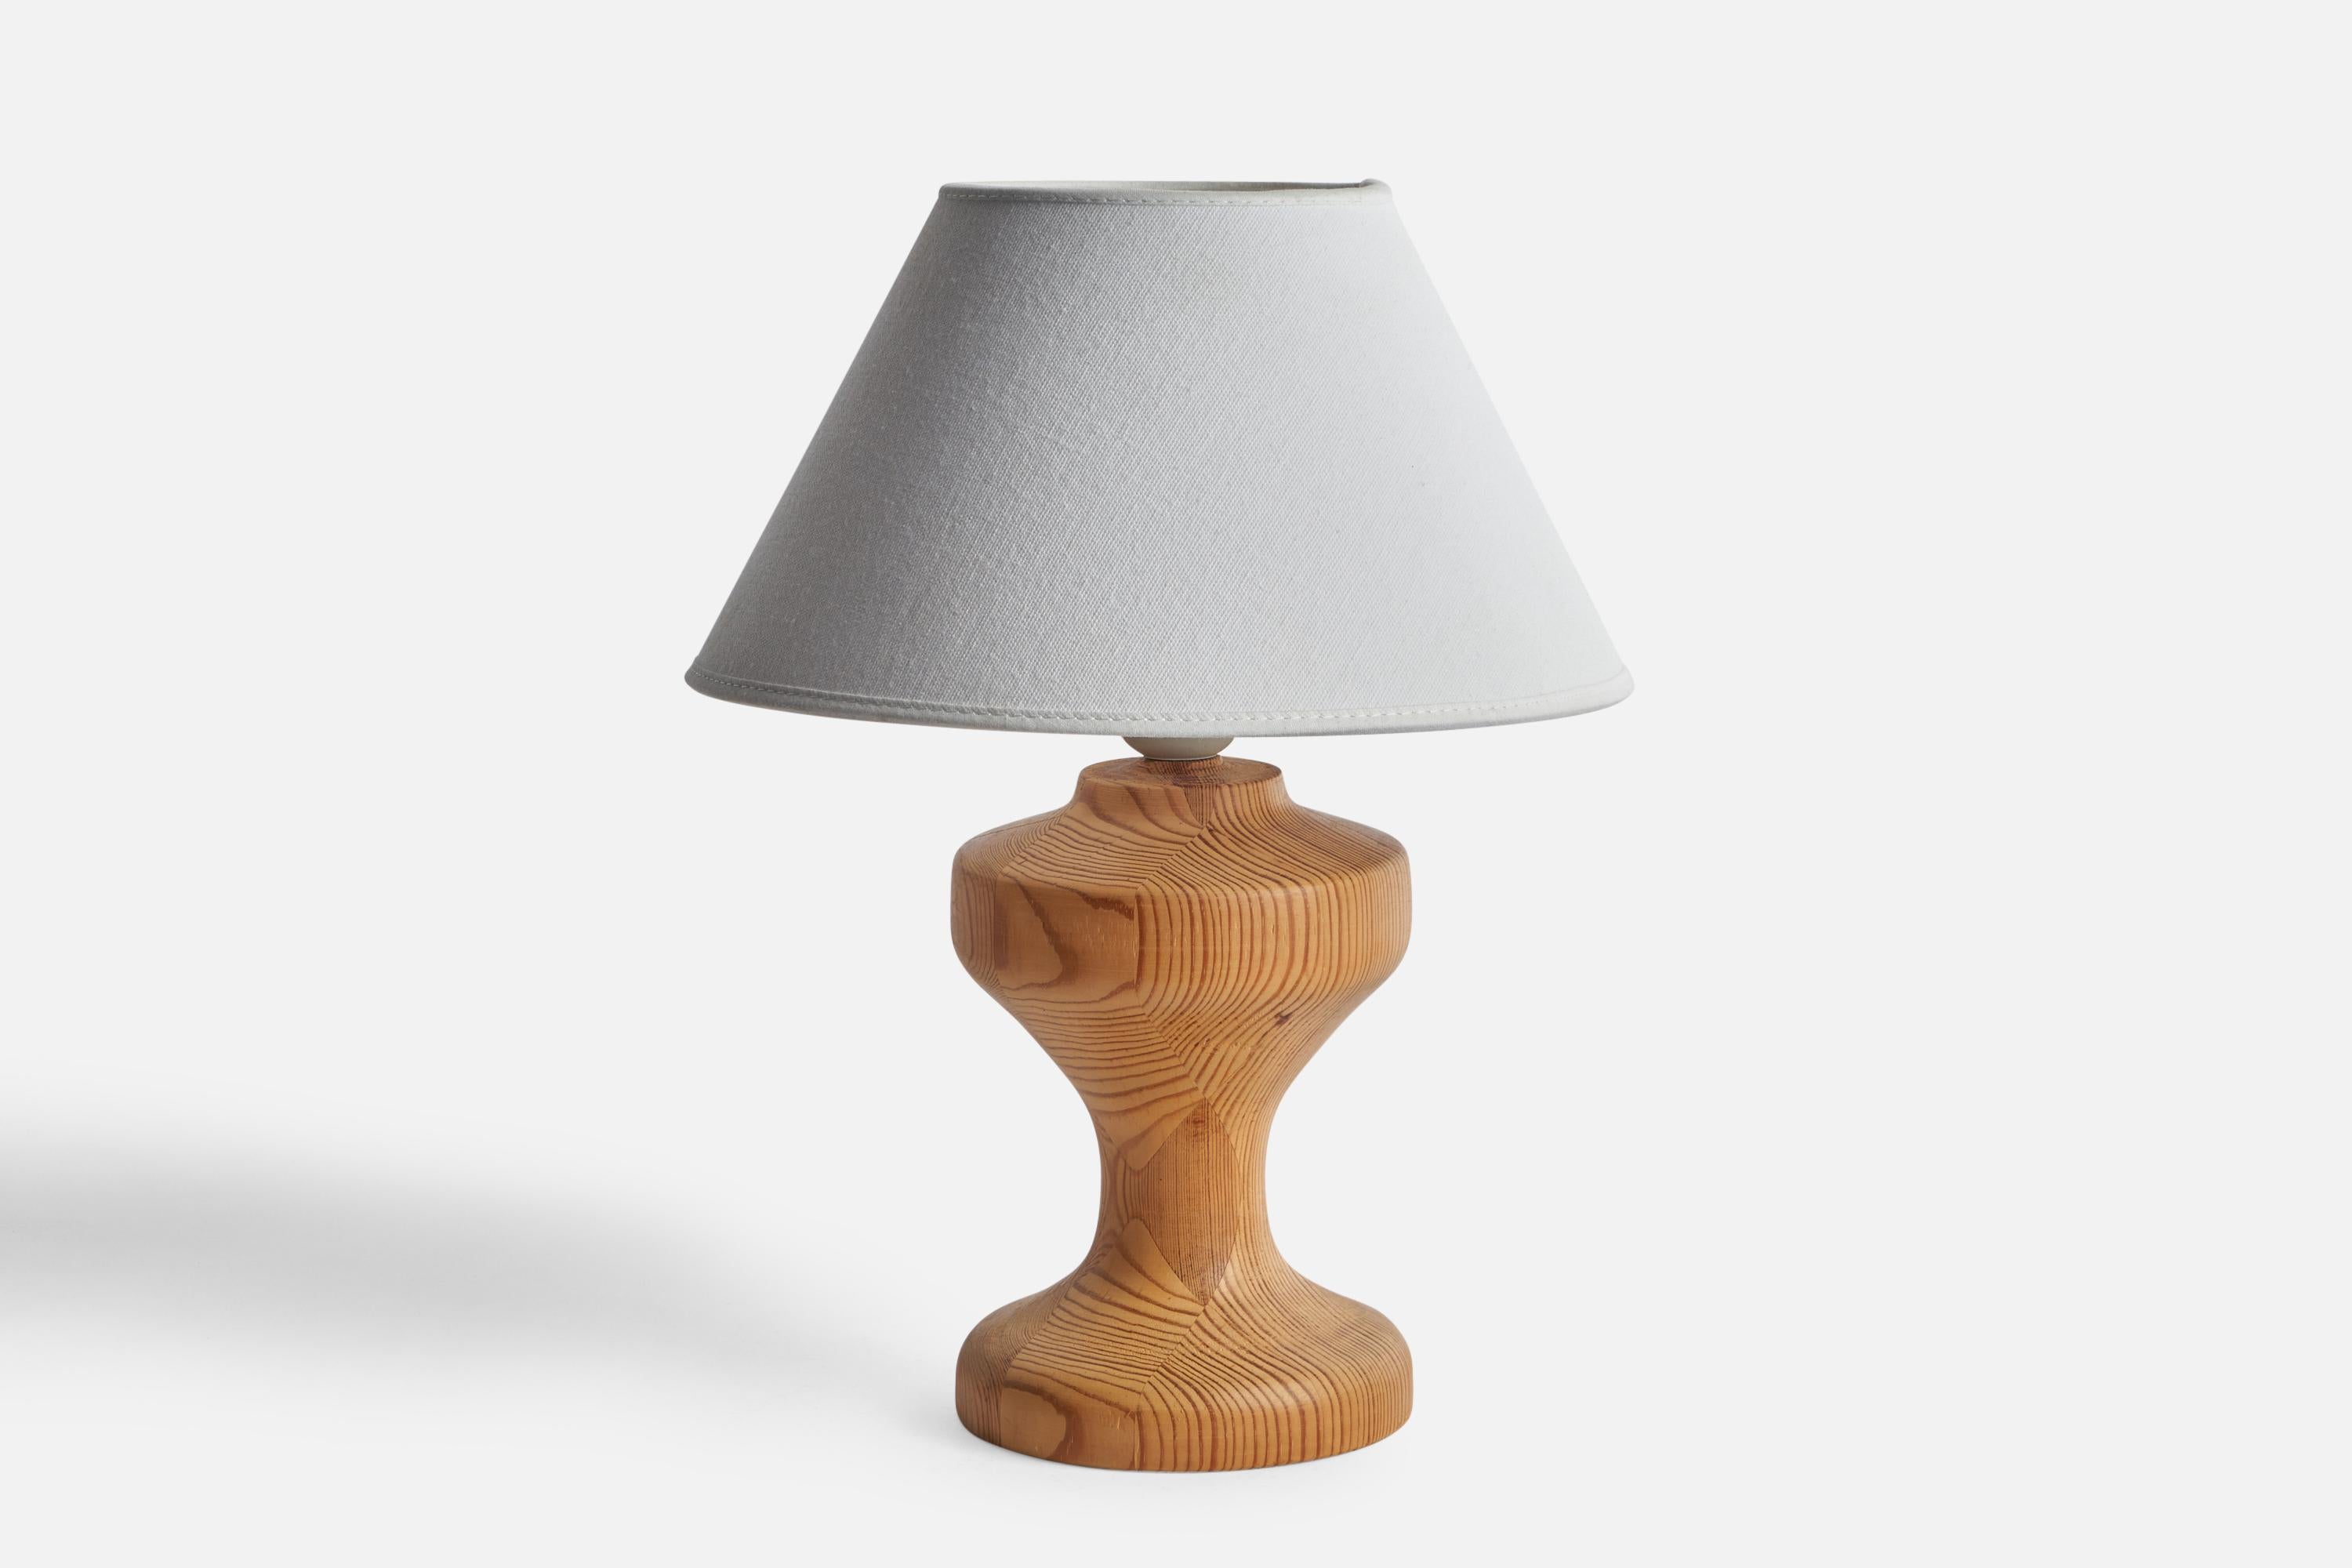 A pine table lamp designed and produced in Sweden, 1970s.

Dimensions of Lamp (inches): 9.3” H x 4.88” Diameter
Dimensions of Shade (inches): 4.5” Top Diameter x 10” Bottom Diameter x 5.25” H
Dimensions of Lamp with Shade (inches): 12.55” H x 10”